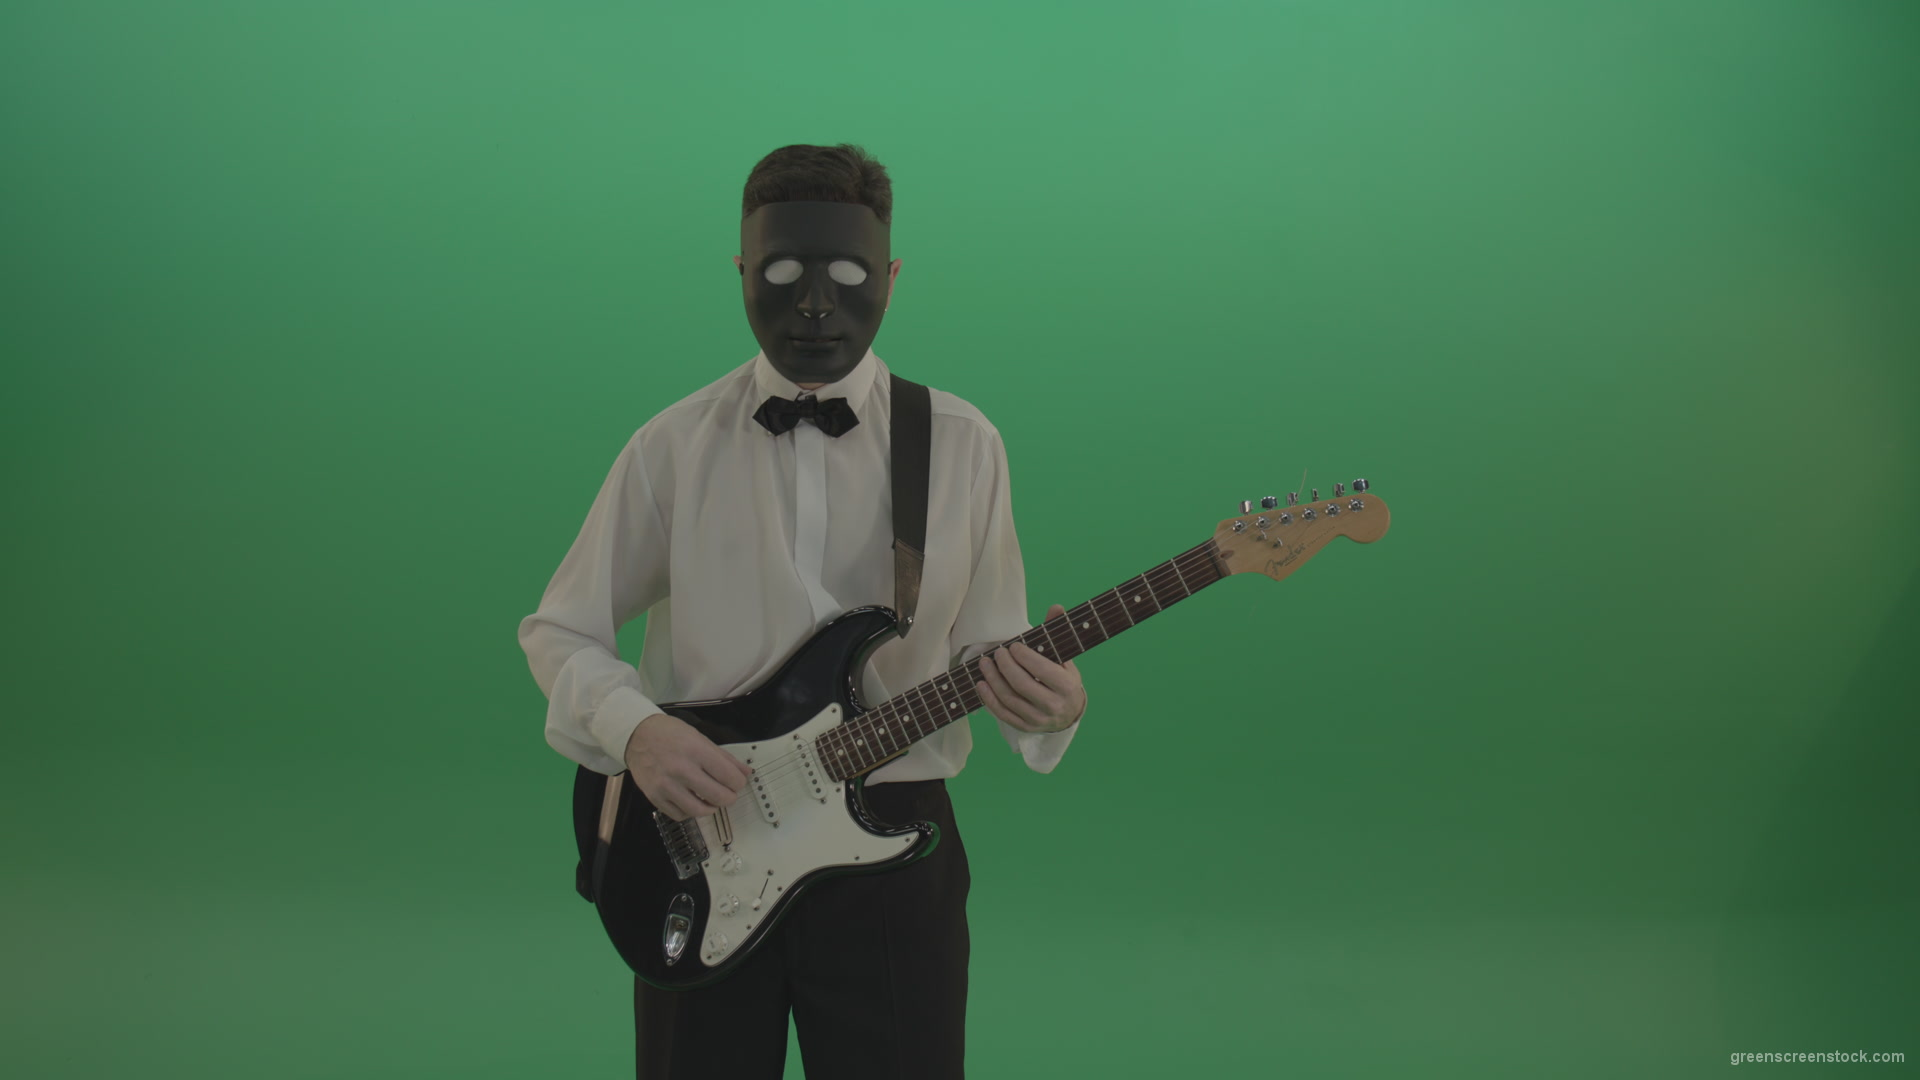 Horror-classic-guitarist-man-in-black-mask-and-white-shirt-play-guitar-on-green-screen_008 Green Screen Stock